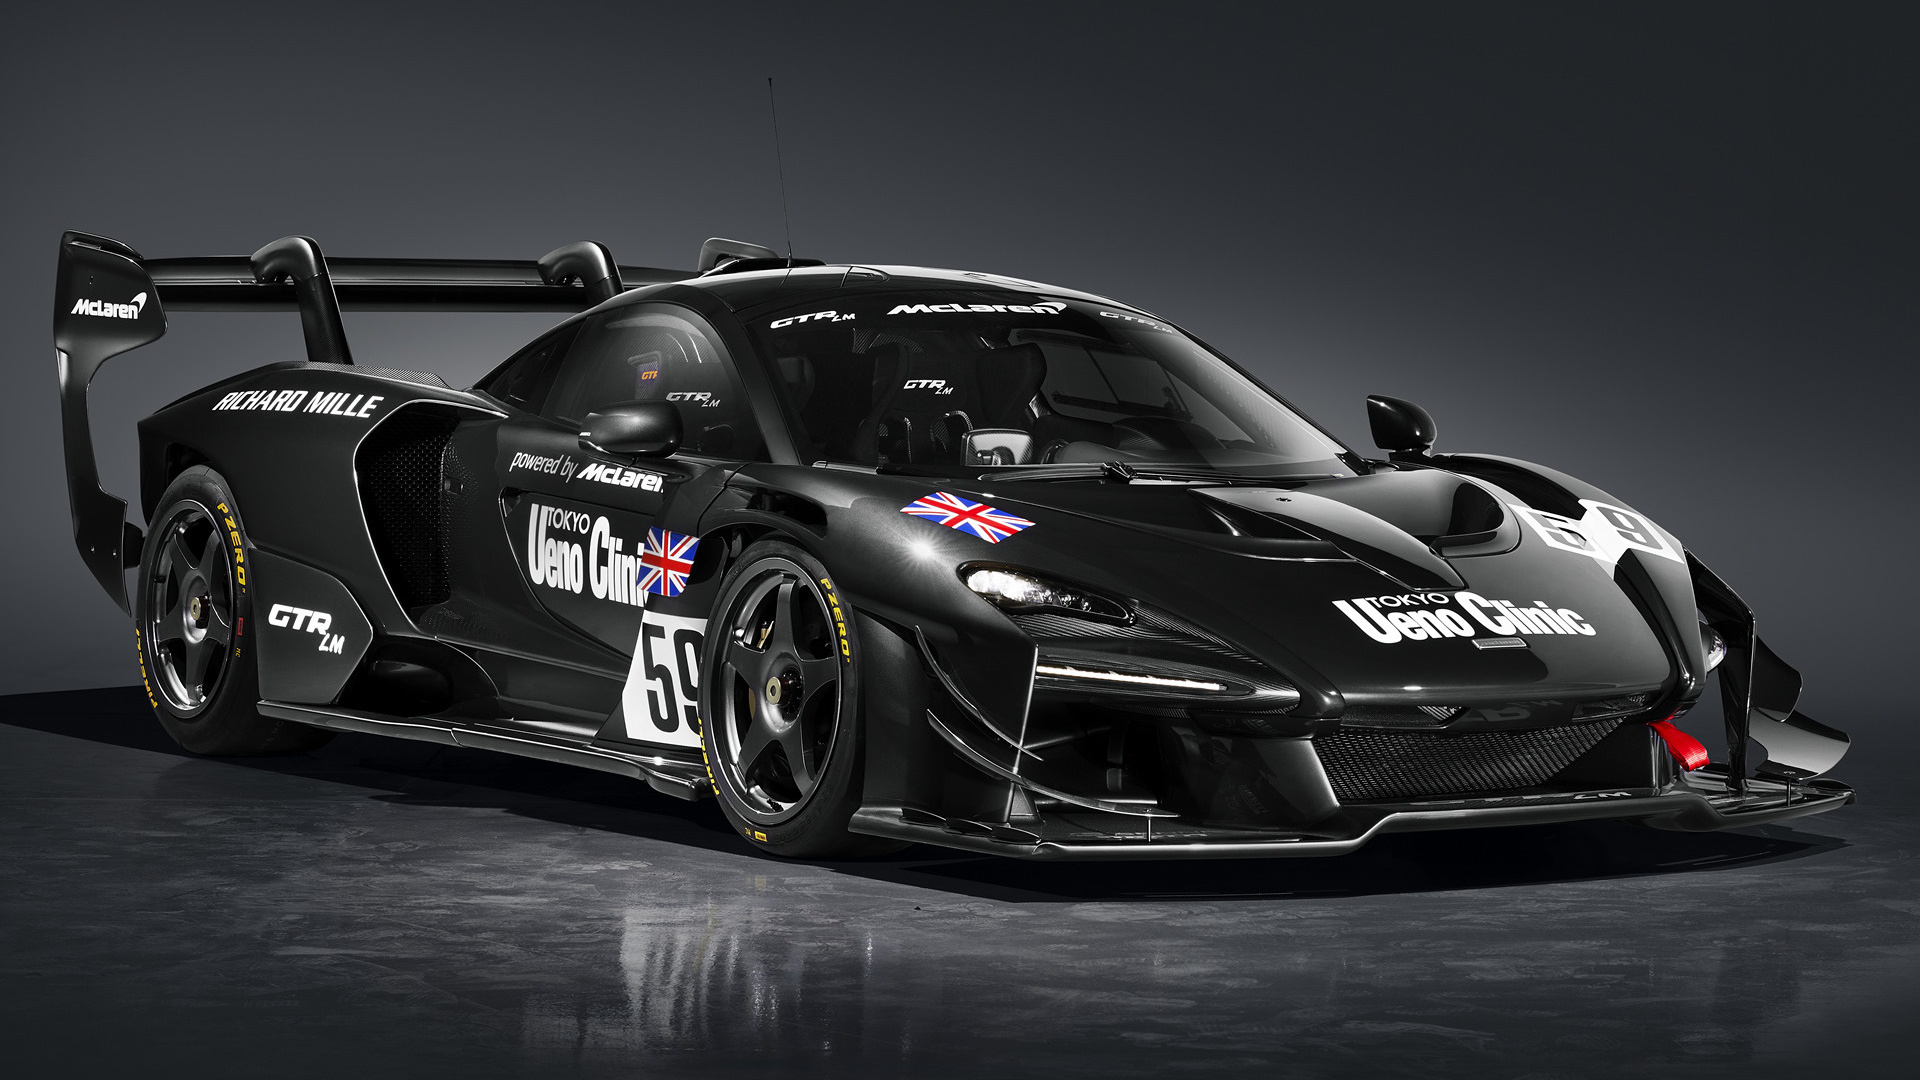 2020 McLaren Senna GTR LM 825/1 Ueno Clinic - Wallpapers and HD Images |  Car Pixel